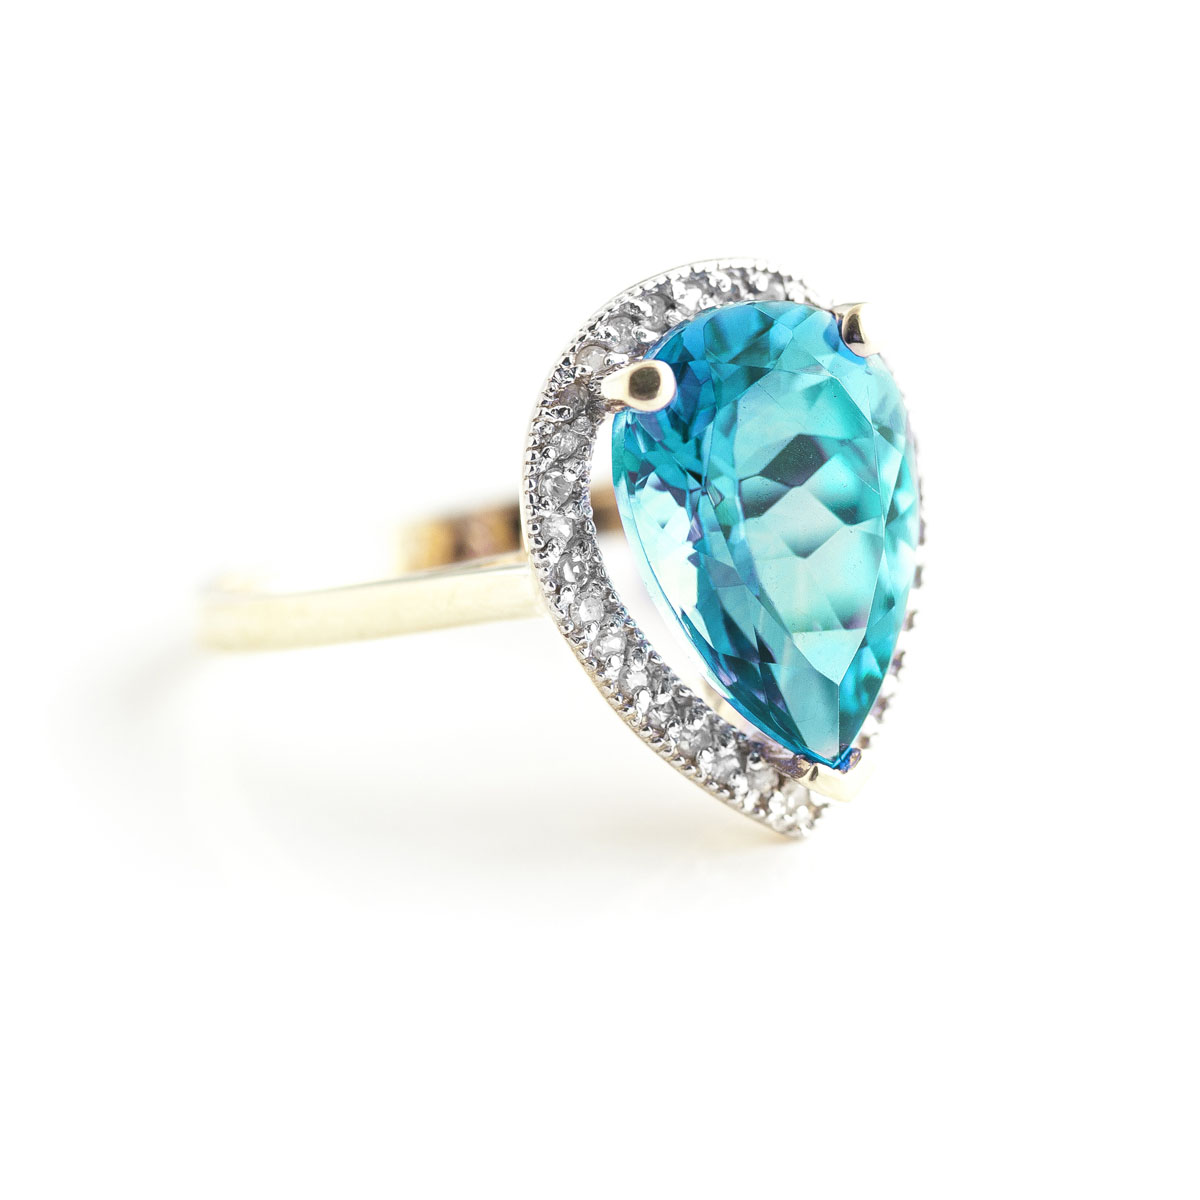 Blue Topaz Halo Ring 4.66 ctw in 18ct Gold